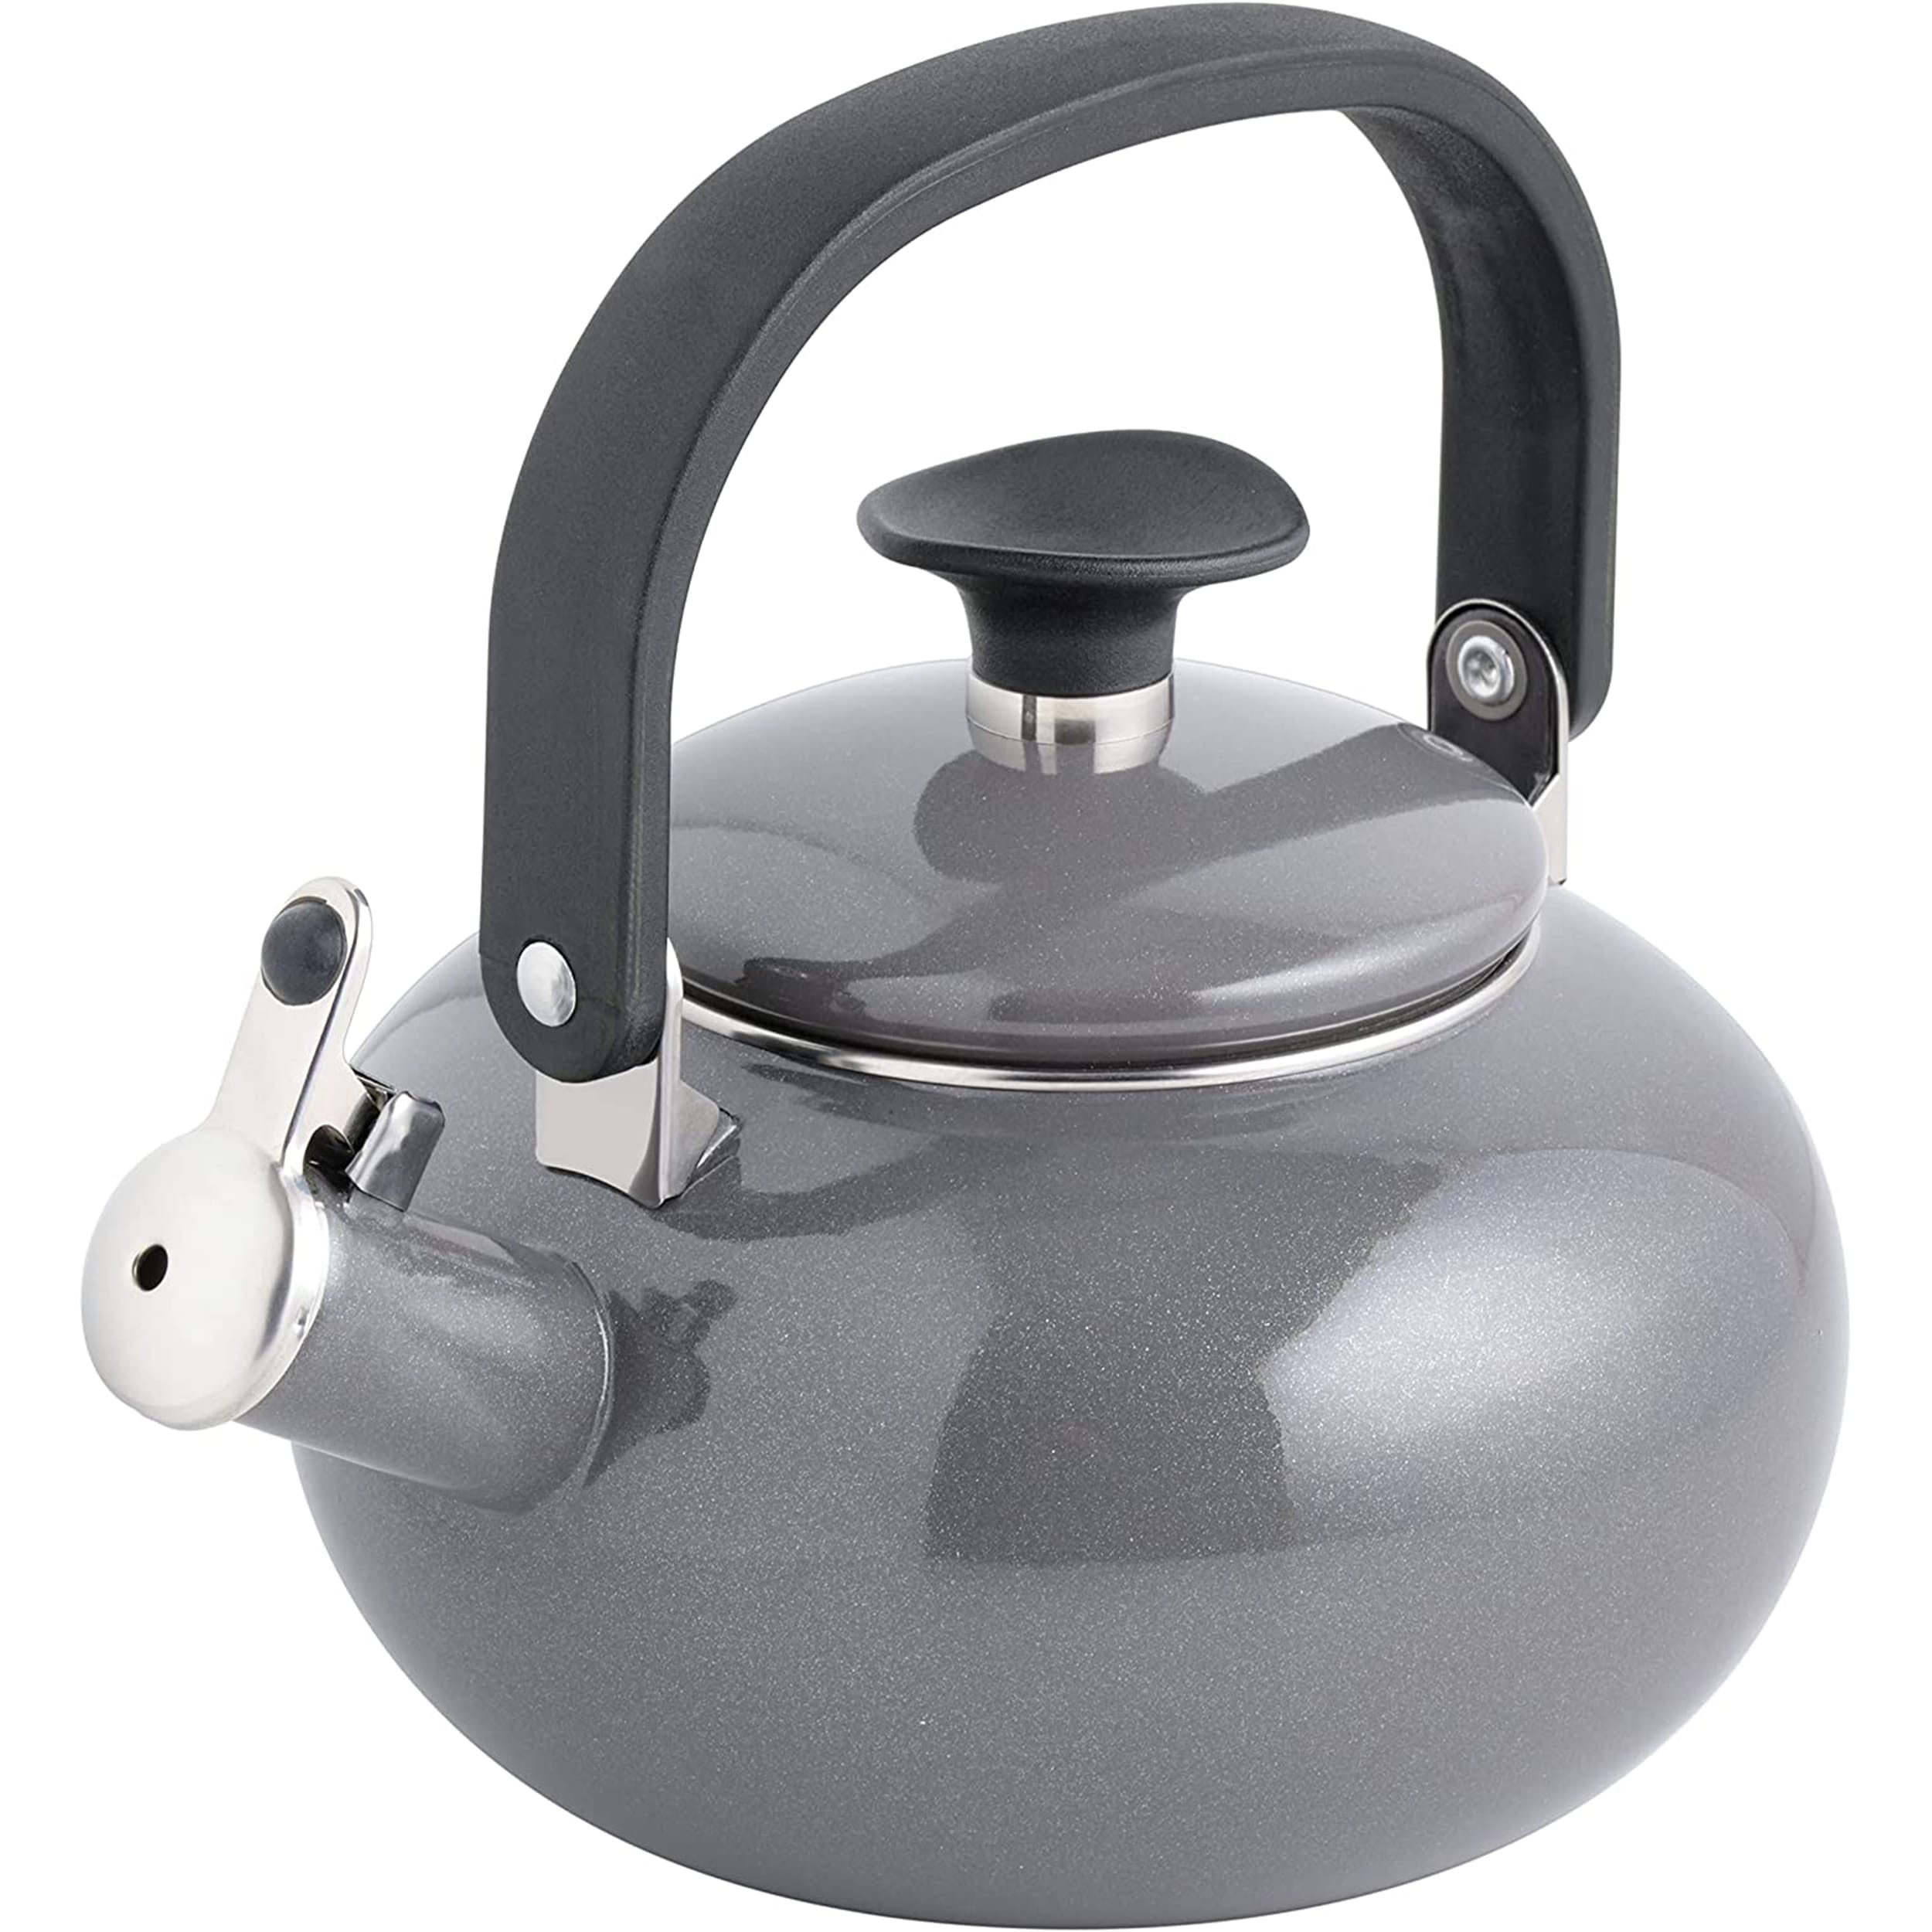 Whistling Tea Kettle Stainless Steel Teapot, Teakettle for Stovetop  Induction Stove Top, Fast Boiling Heat Water Tea Pot 2.2 Quart(Gray)